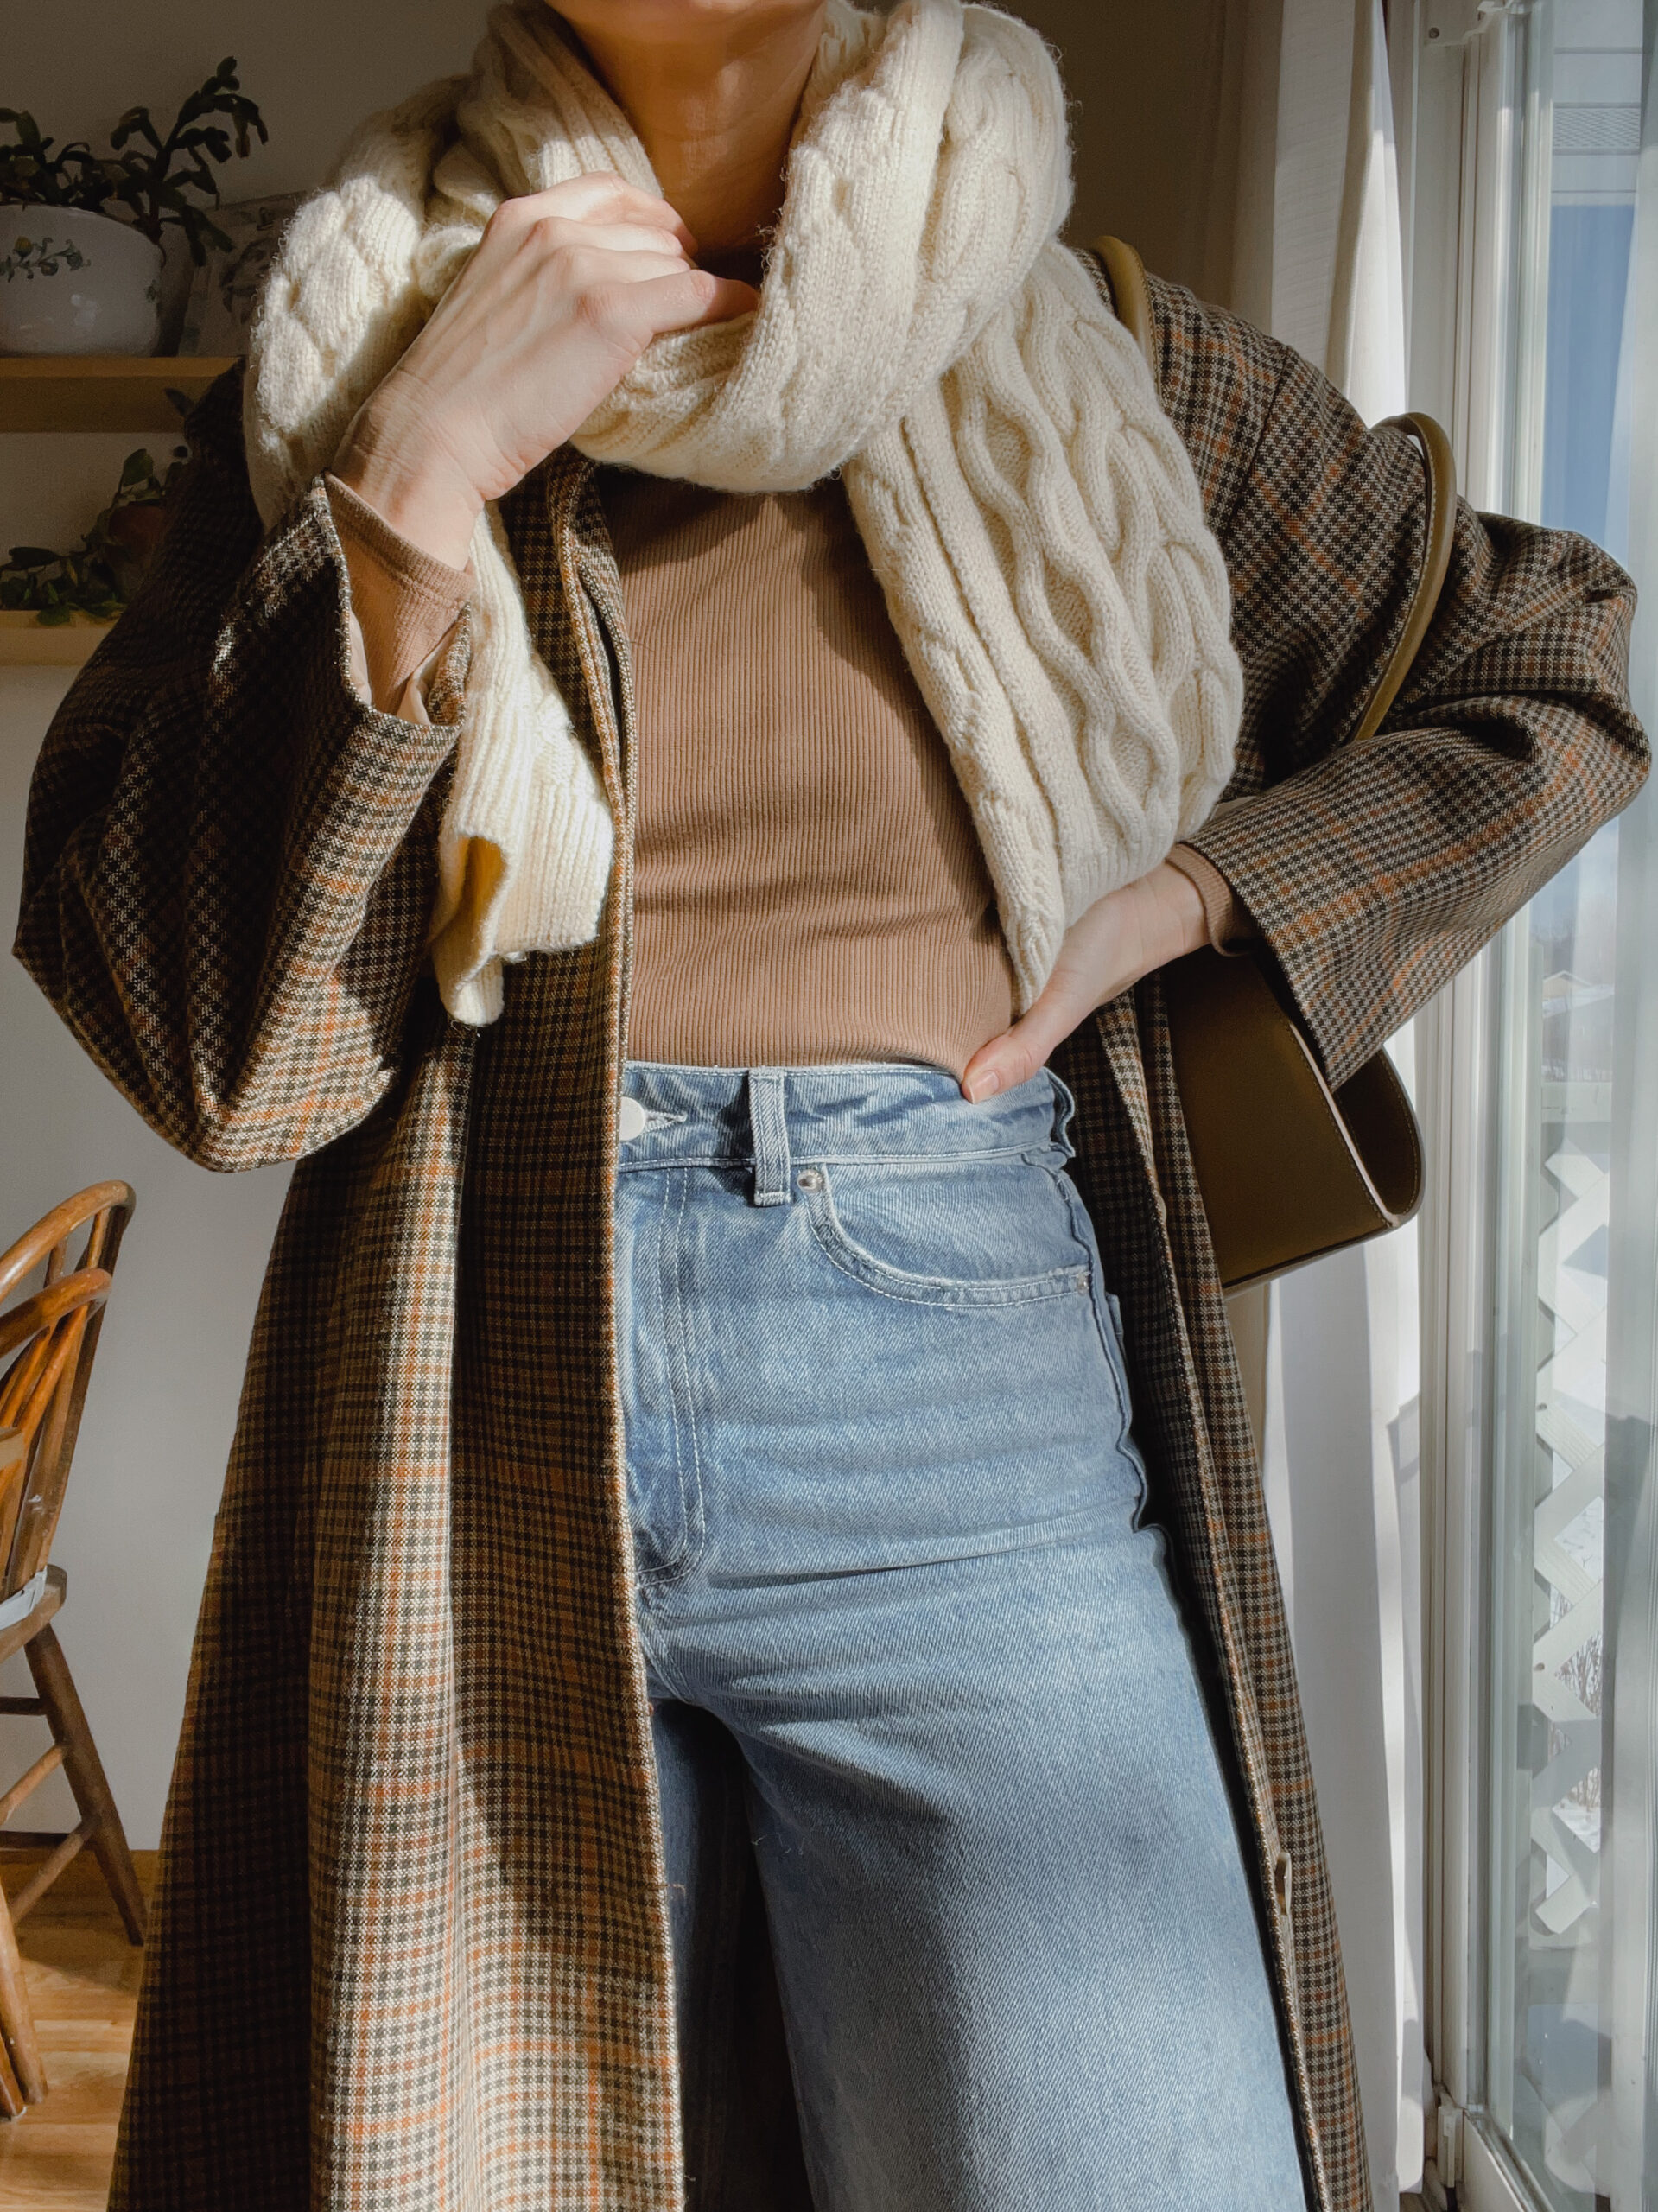 Karin Emily wears a toteme trench coat, madewell bodysuit, wide leg jeans, cableknit scarf,